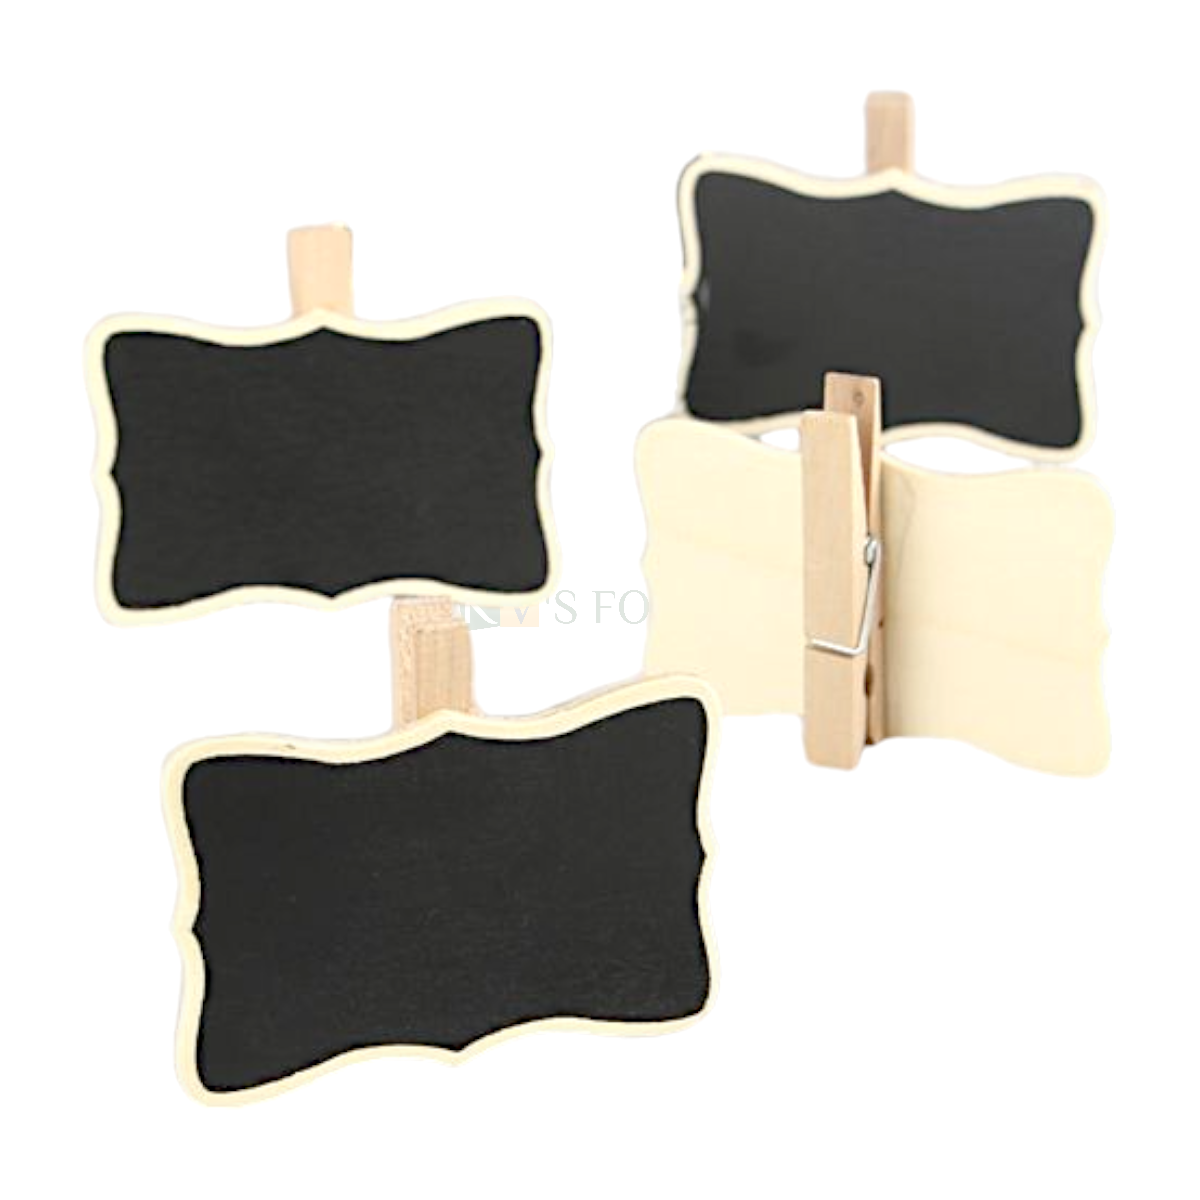 4PC Mini Wavy Design Shape Chalkboard Clips Set Mini Clothespins Tags, Labels Kids Wooden Blackboard for Food Wedding Signs, Message Board Pegs, Birthdays Buffet Event Wedding Party Table Decorations